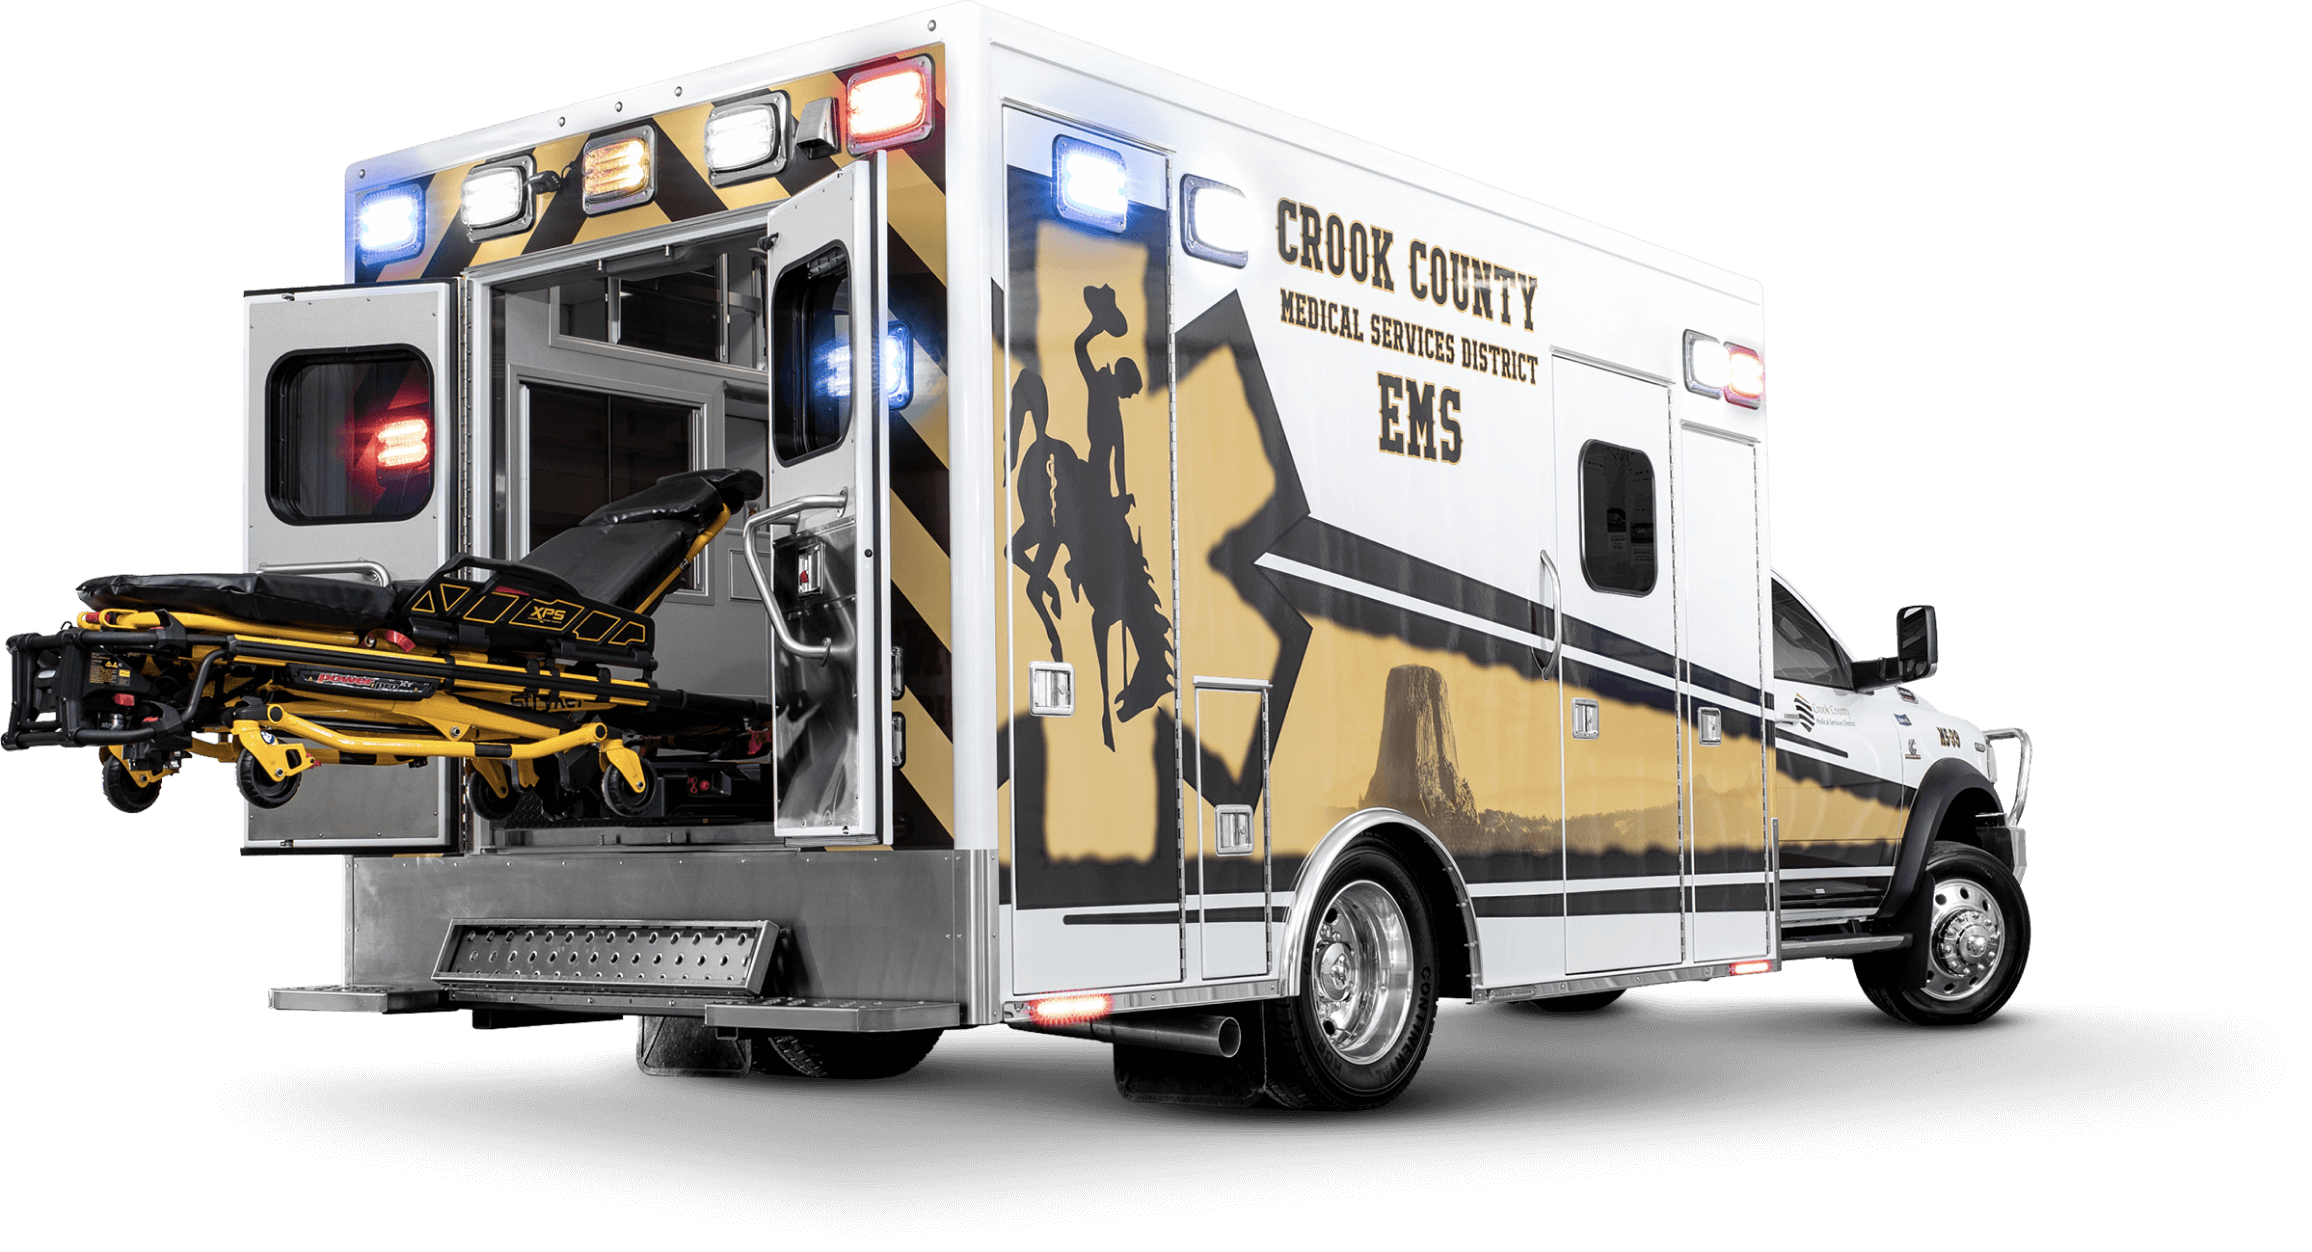 Rear View of Crook County Ambulance